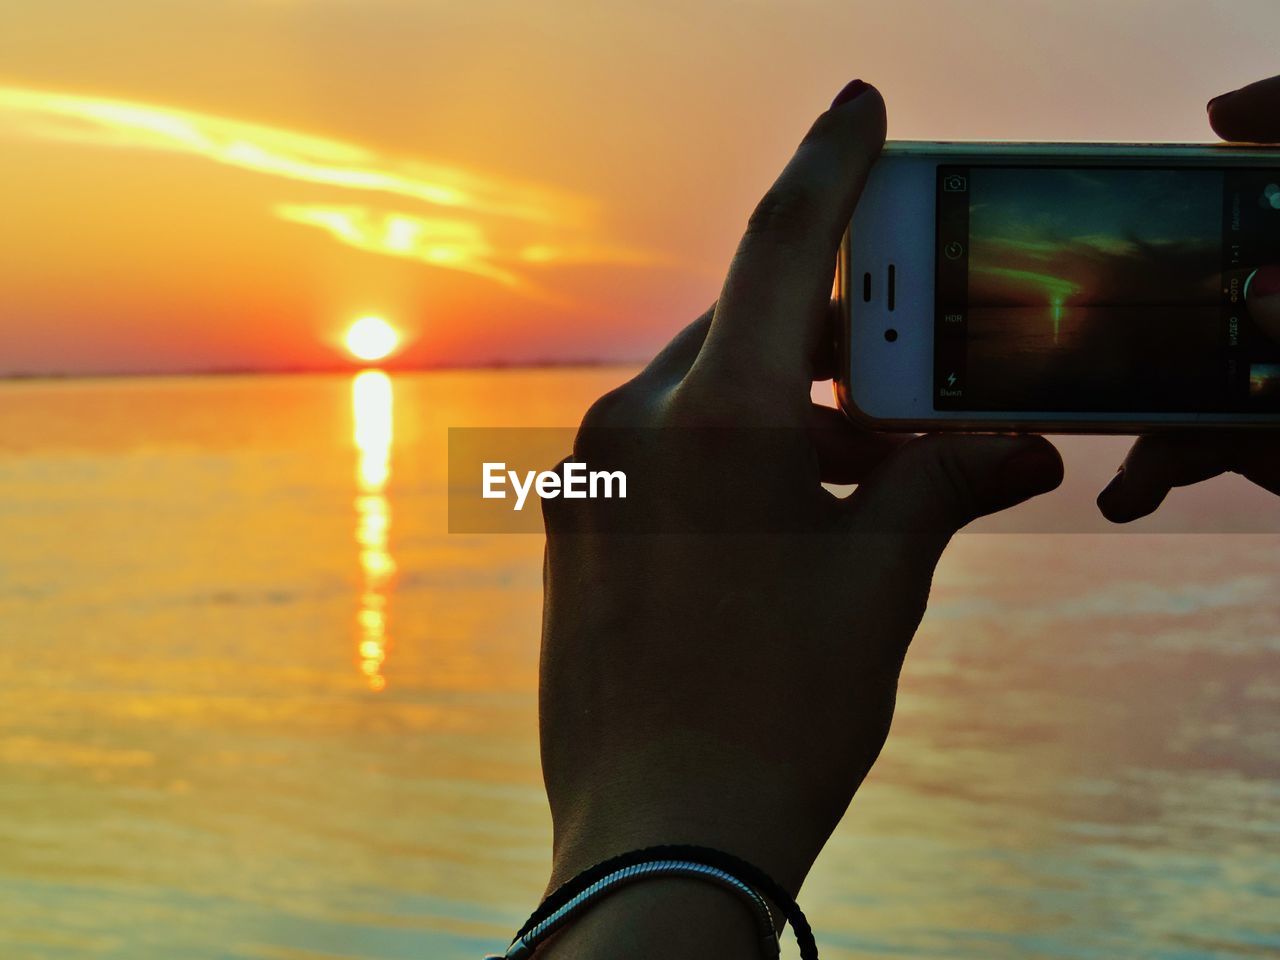 HUMAN HAND HOLDING CAMERA AGAINST SEA DURING SUNSET